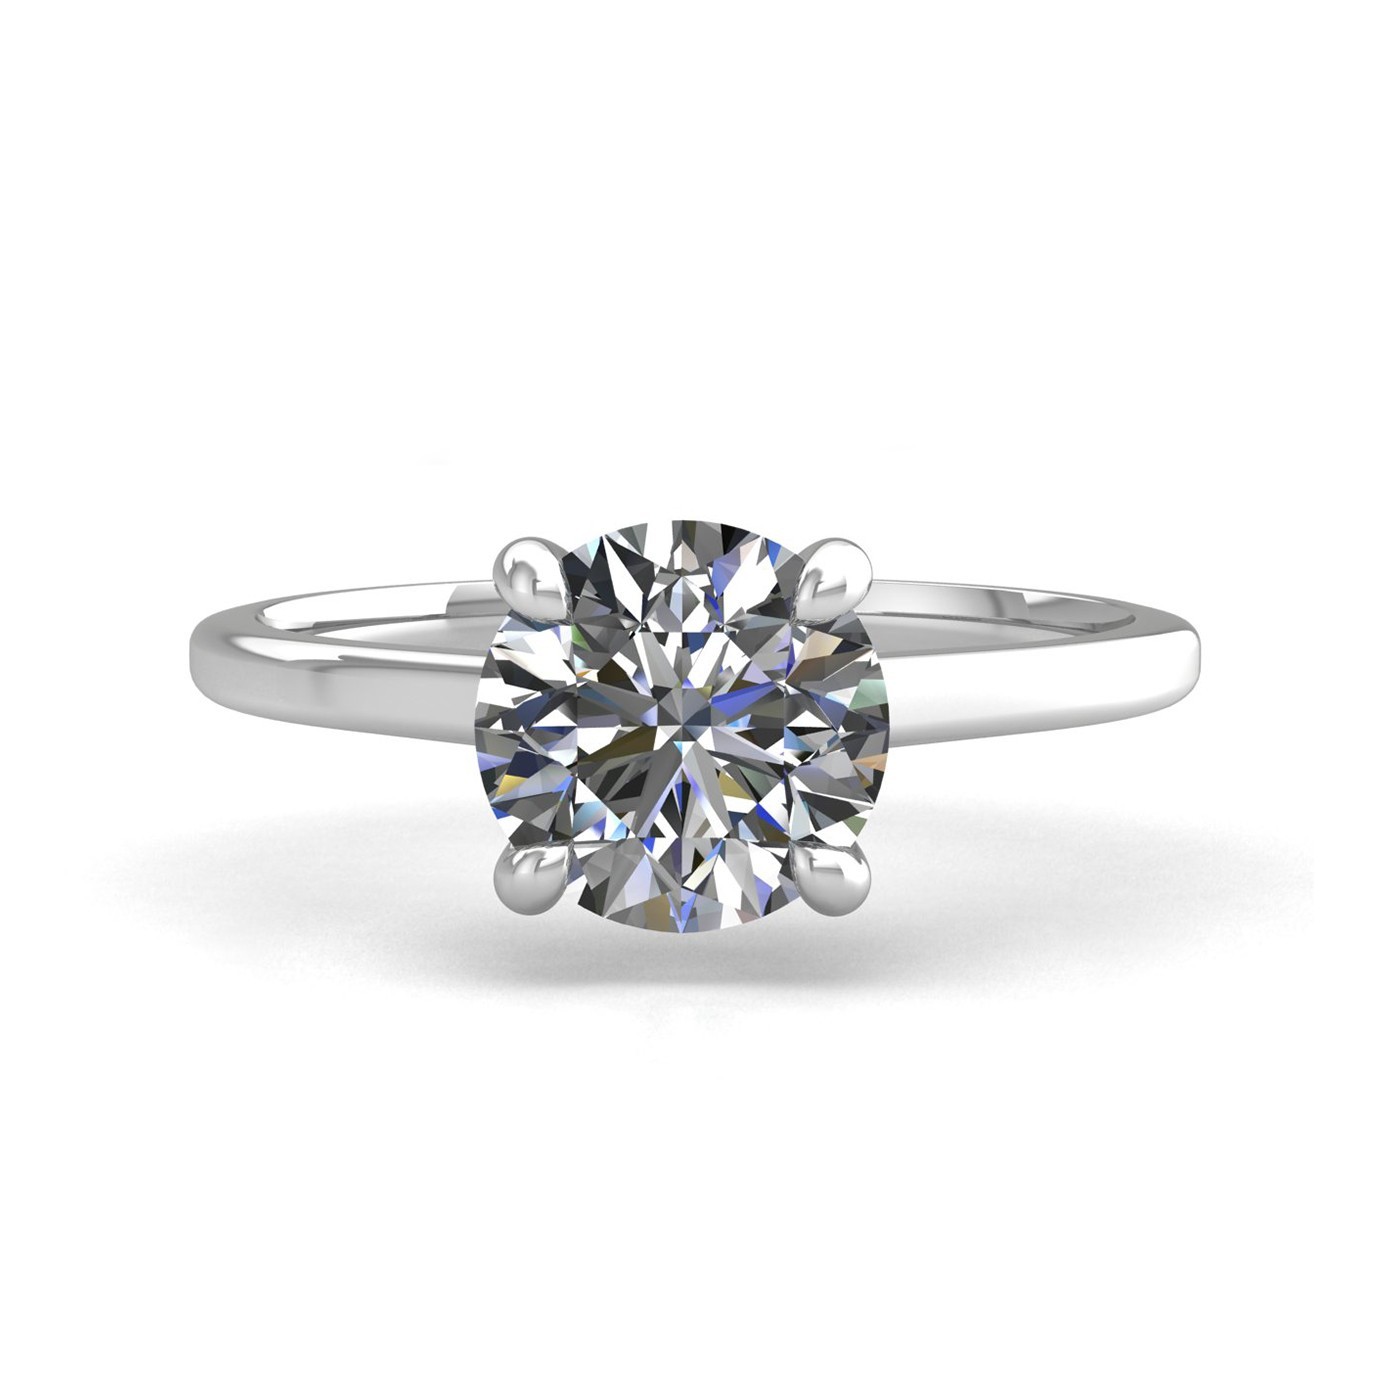 18k white gold 1.2ct 4 prongs solitaire round cut diamond engagement ring with whisper thin band